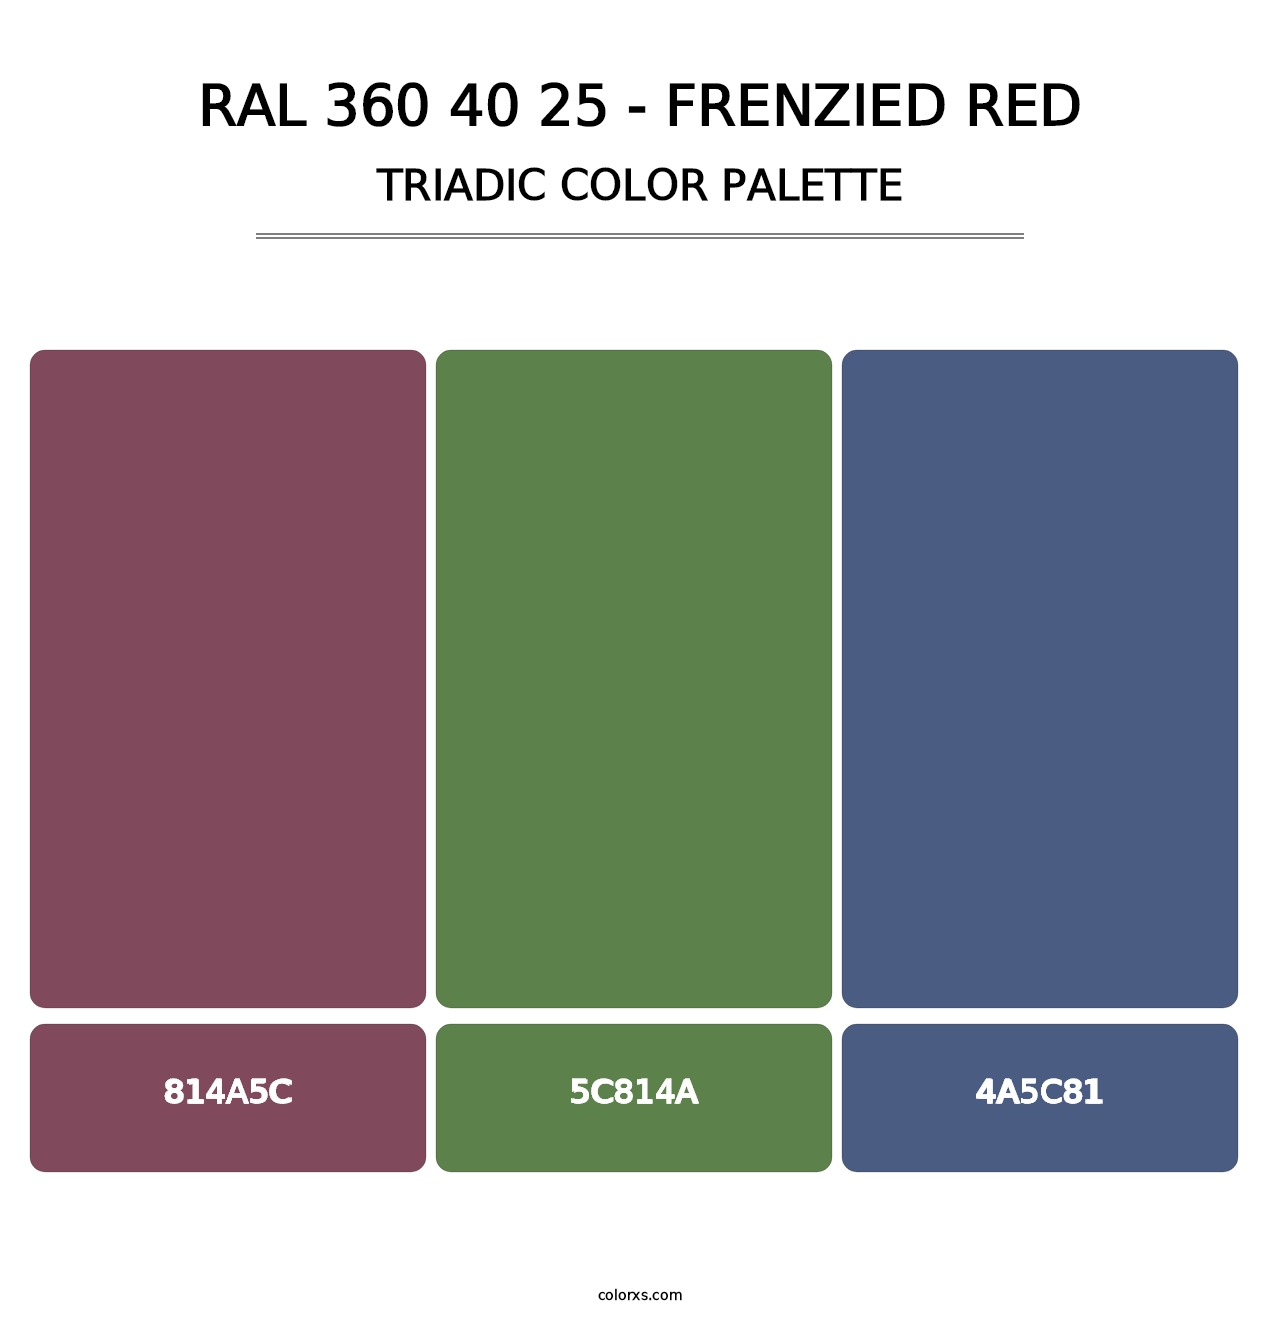 RAL 360 40 25 - Frenzied Red - Triadic Color Palette